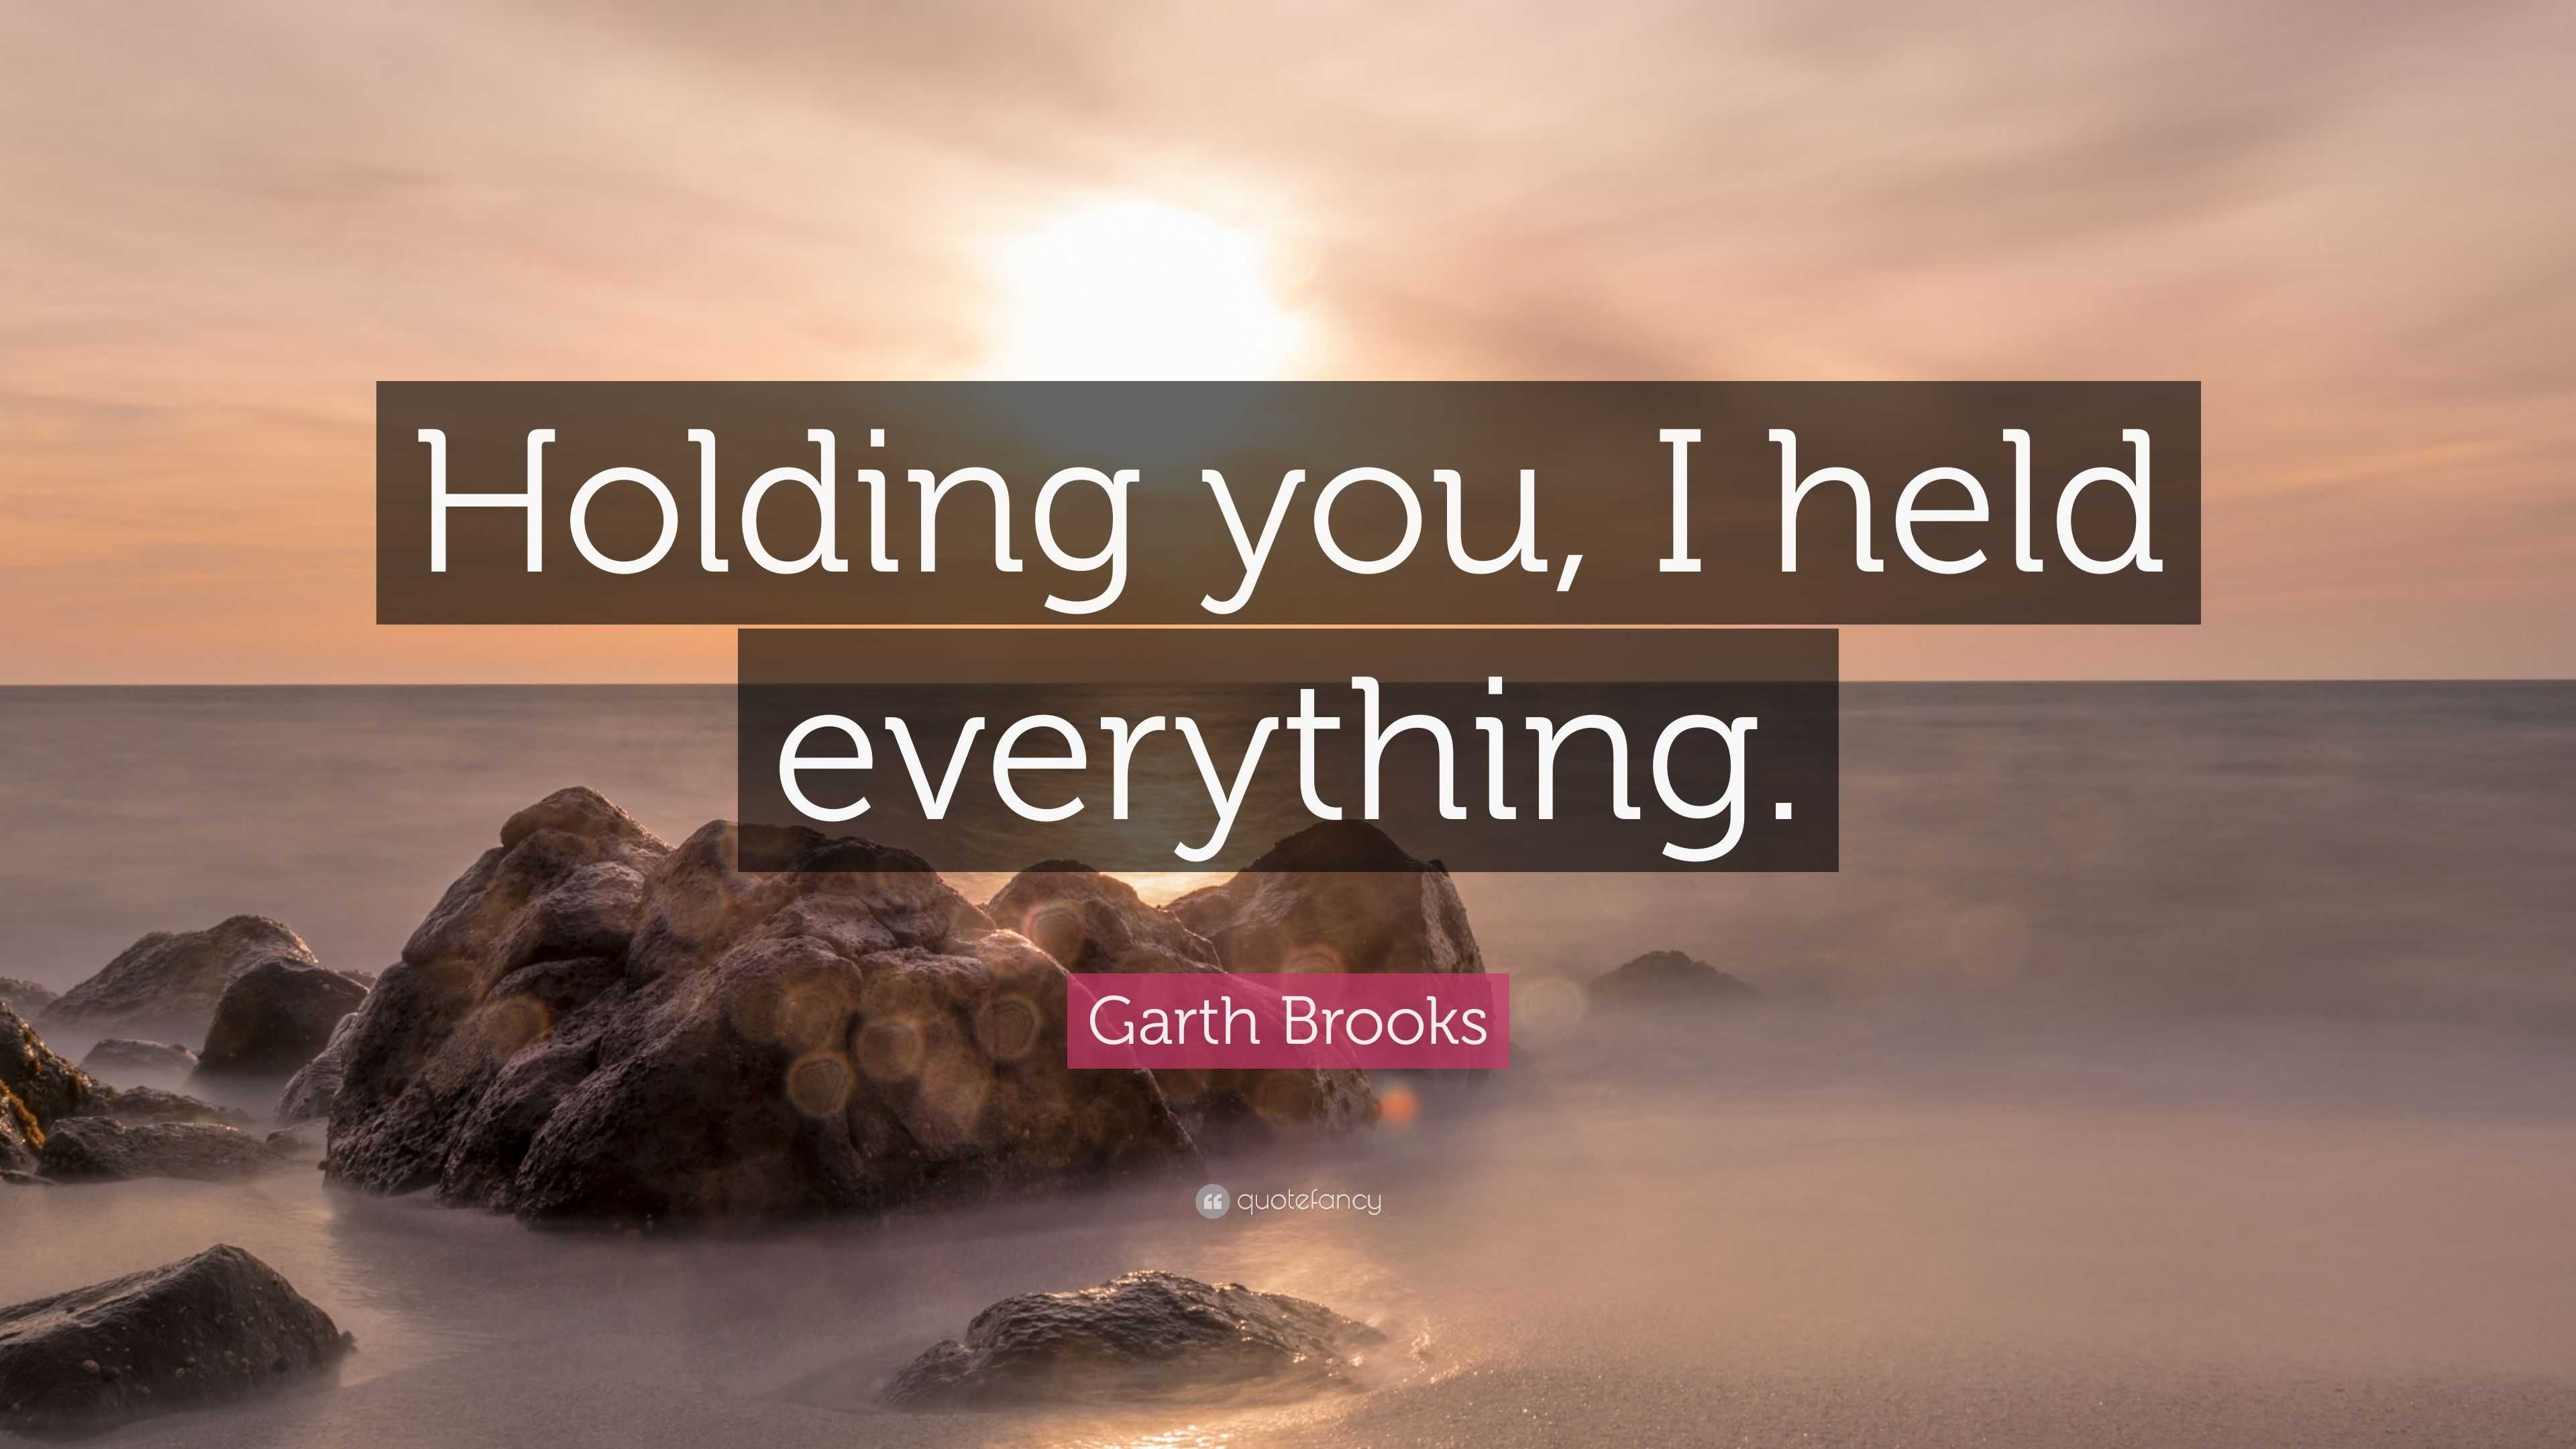 Garth Brooks Quote: “Holding you, I held everything.”